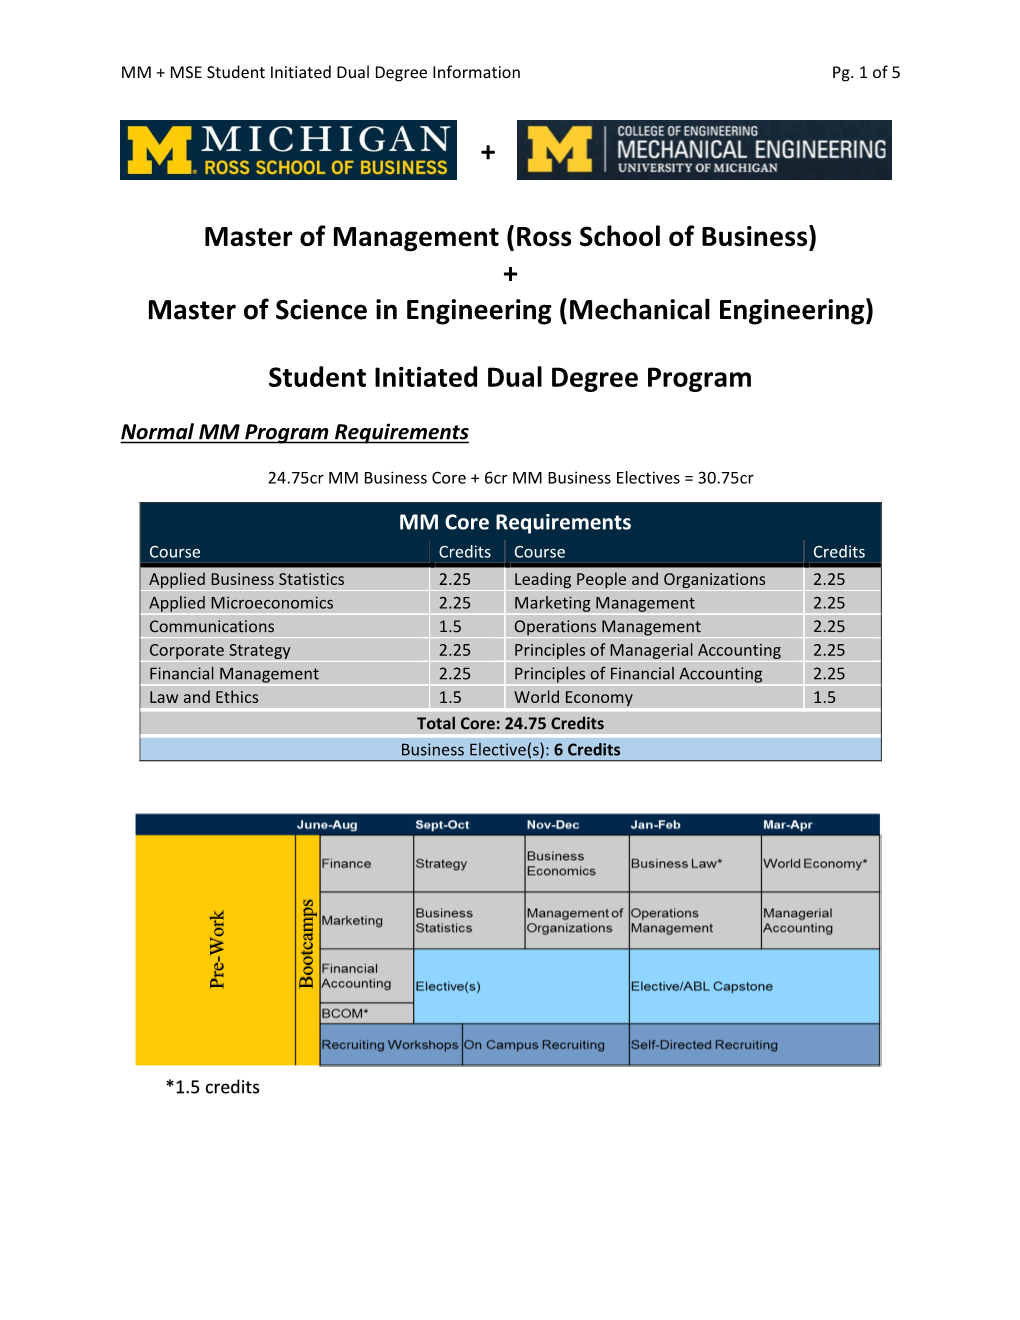 Master of Management (Ross School of Business) + Master of Science in Engineering (Mechanical Engineering)